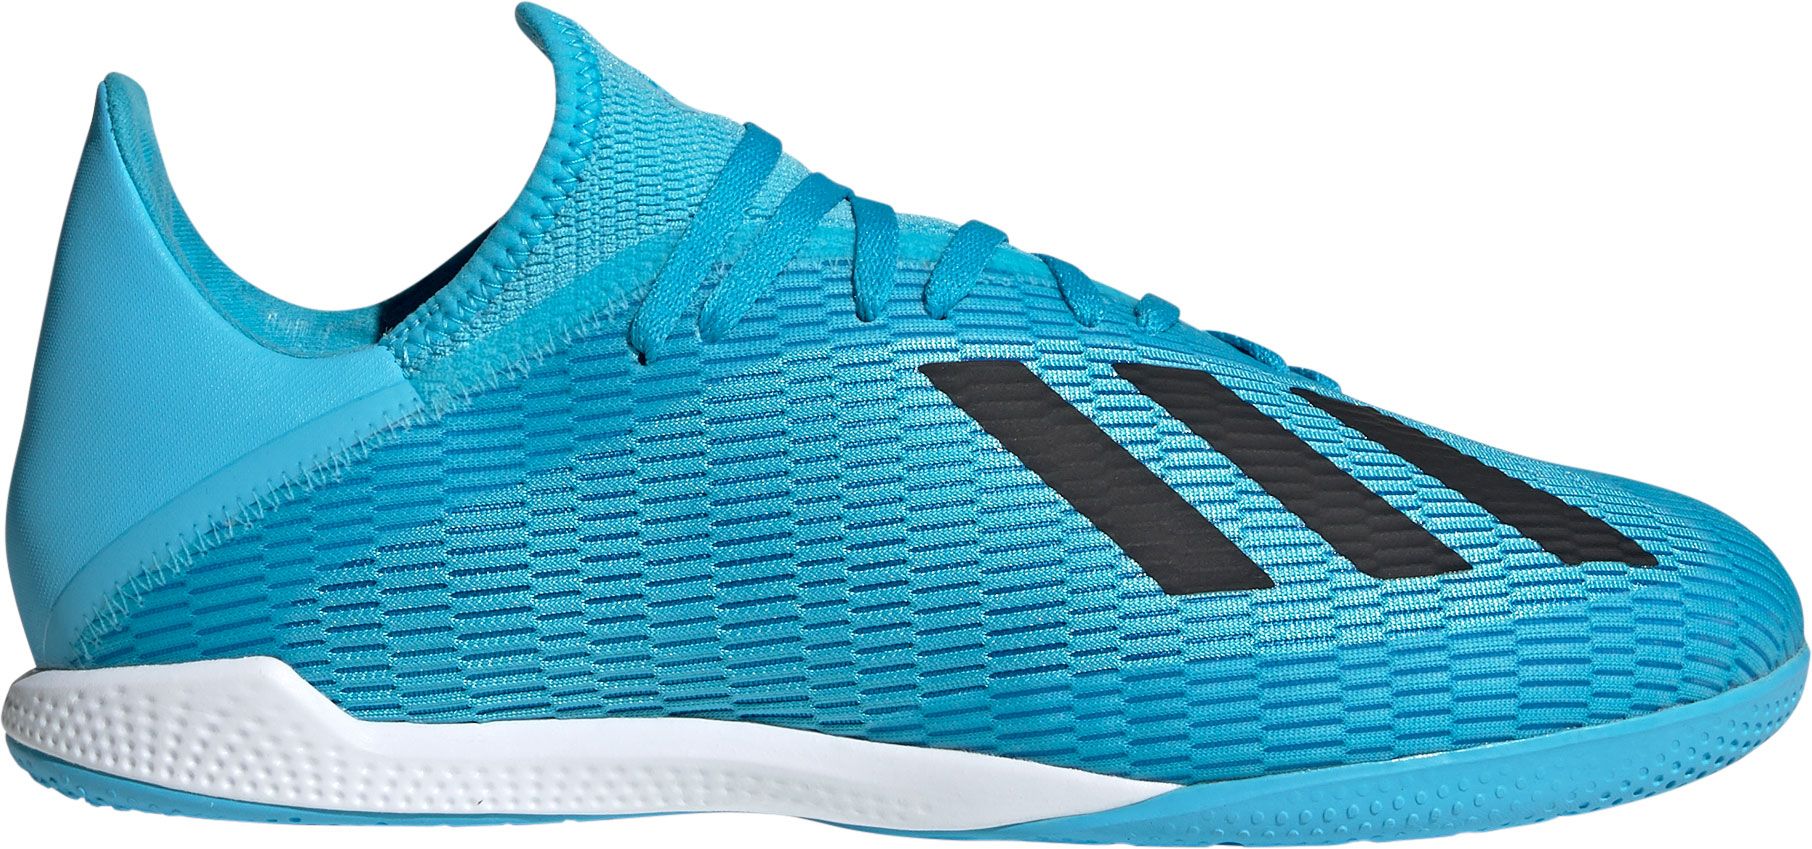 mens adidas indoor soccer shoes